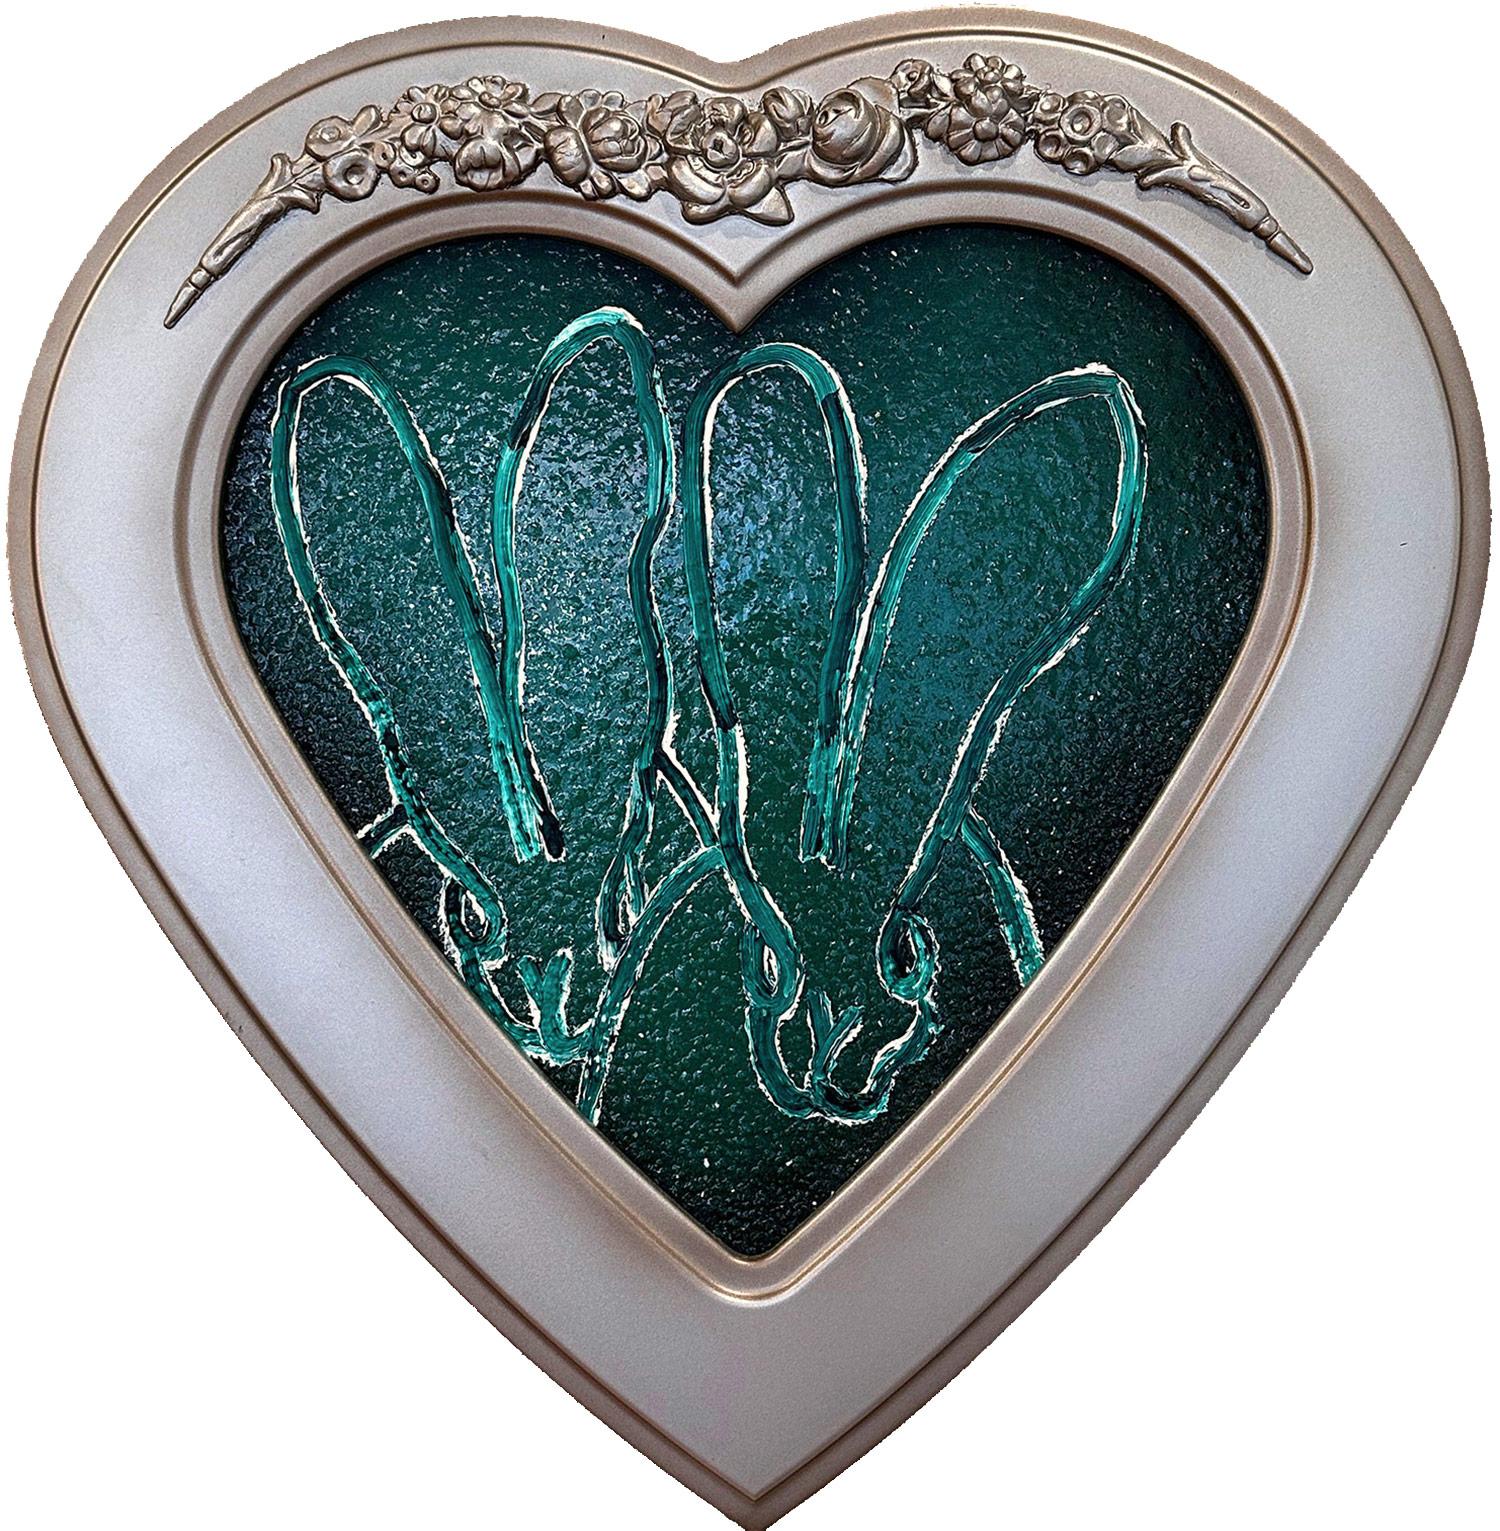 Hunt Slonem Abstract Painting - "2 in Green Diamond Heart" Heart Shaped Diamond Dust Double Bunny Oil Painting